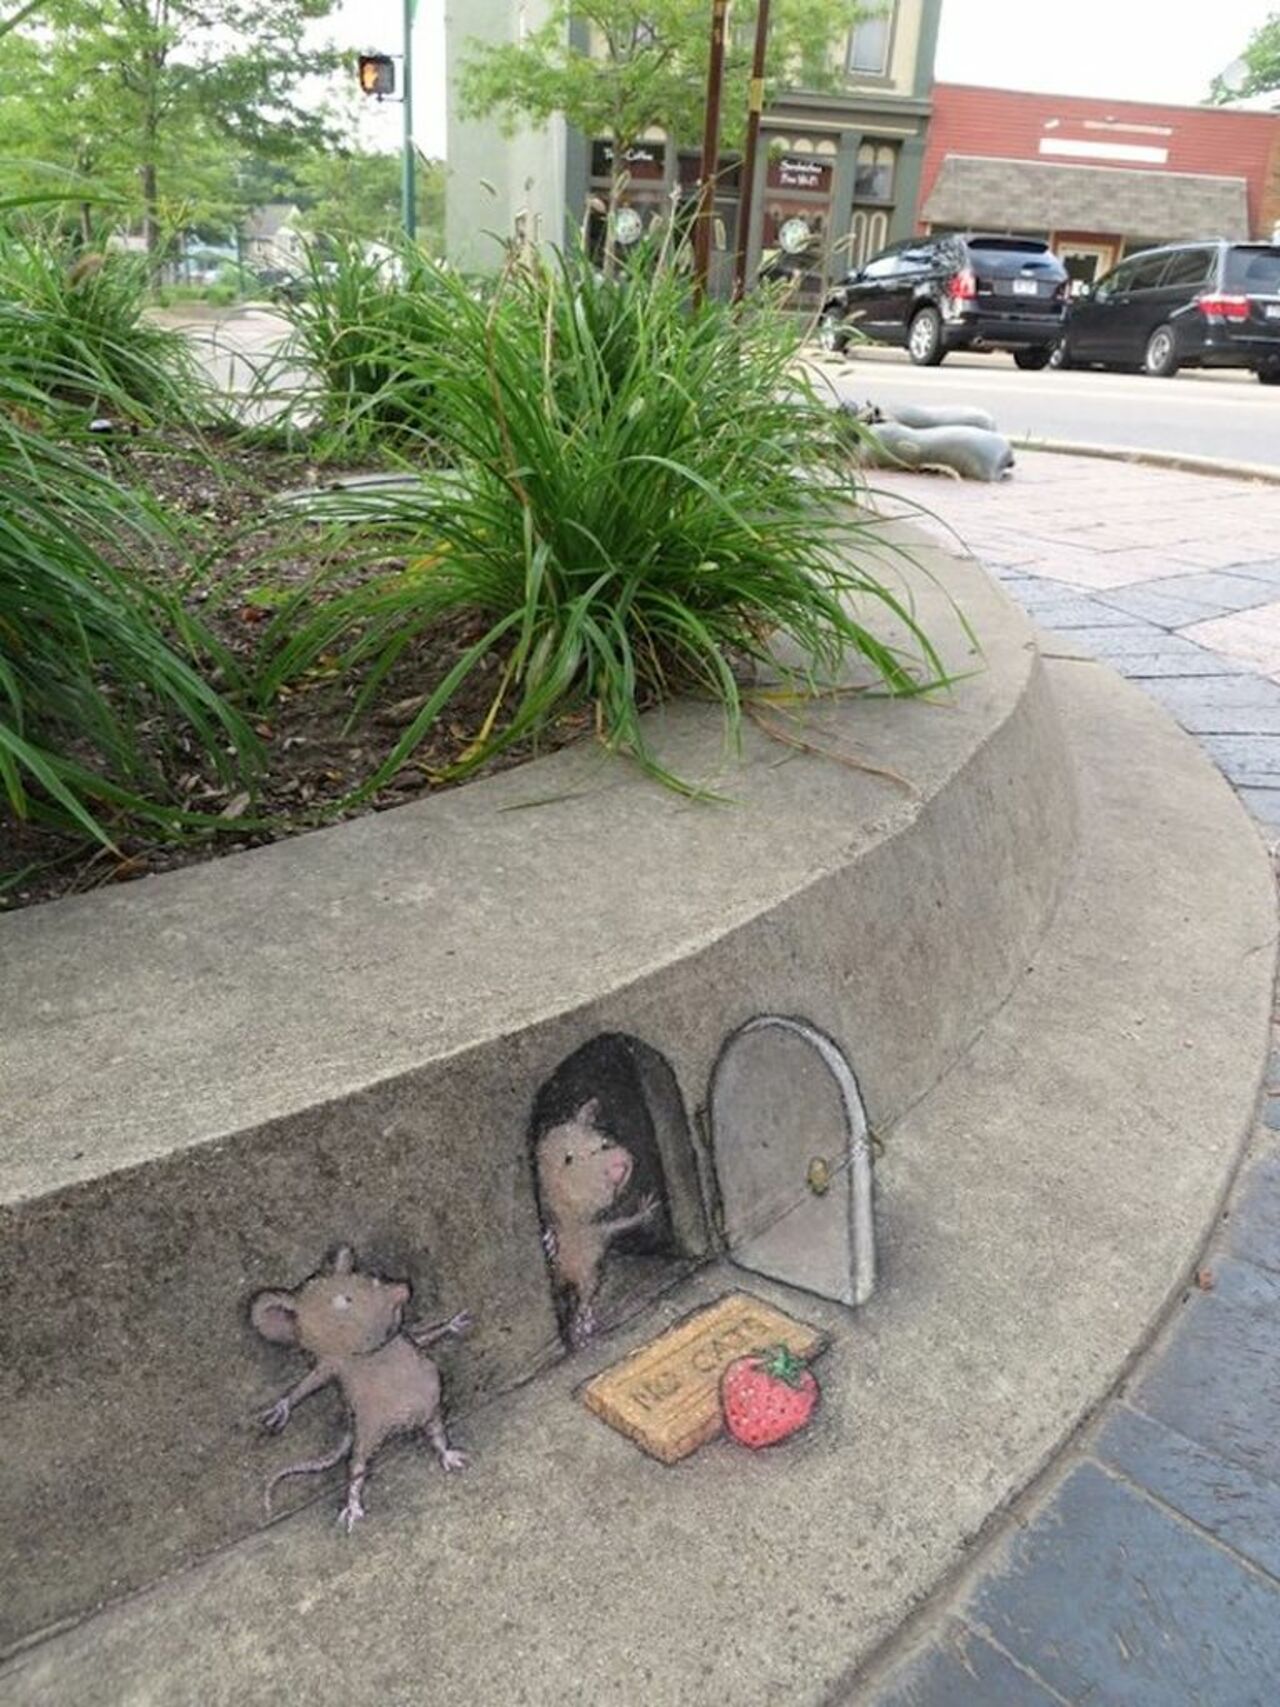 #DavidZinn does #Streetart with a streak of humor. I love his work with mice and cats. https://t.co/2fbV1N2qkg